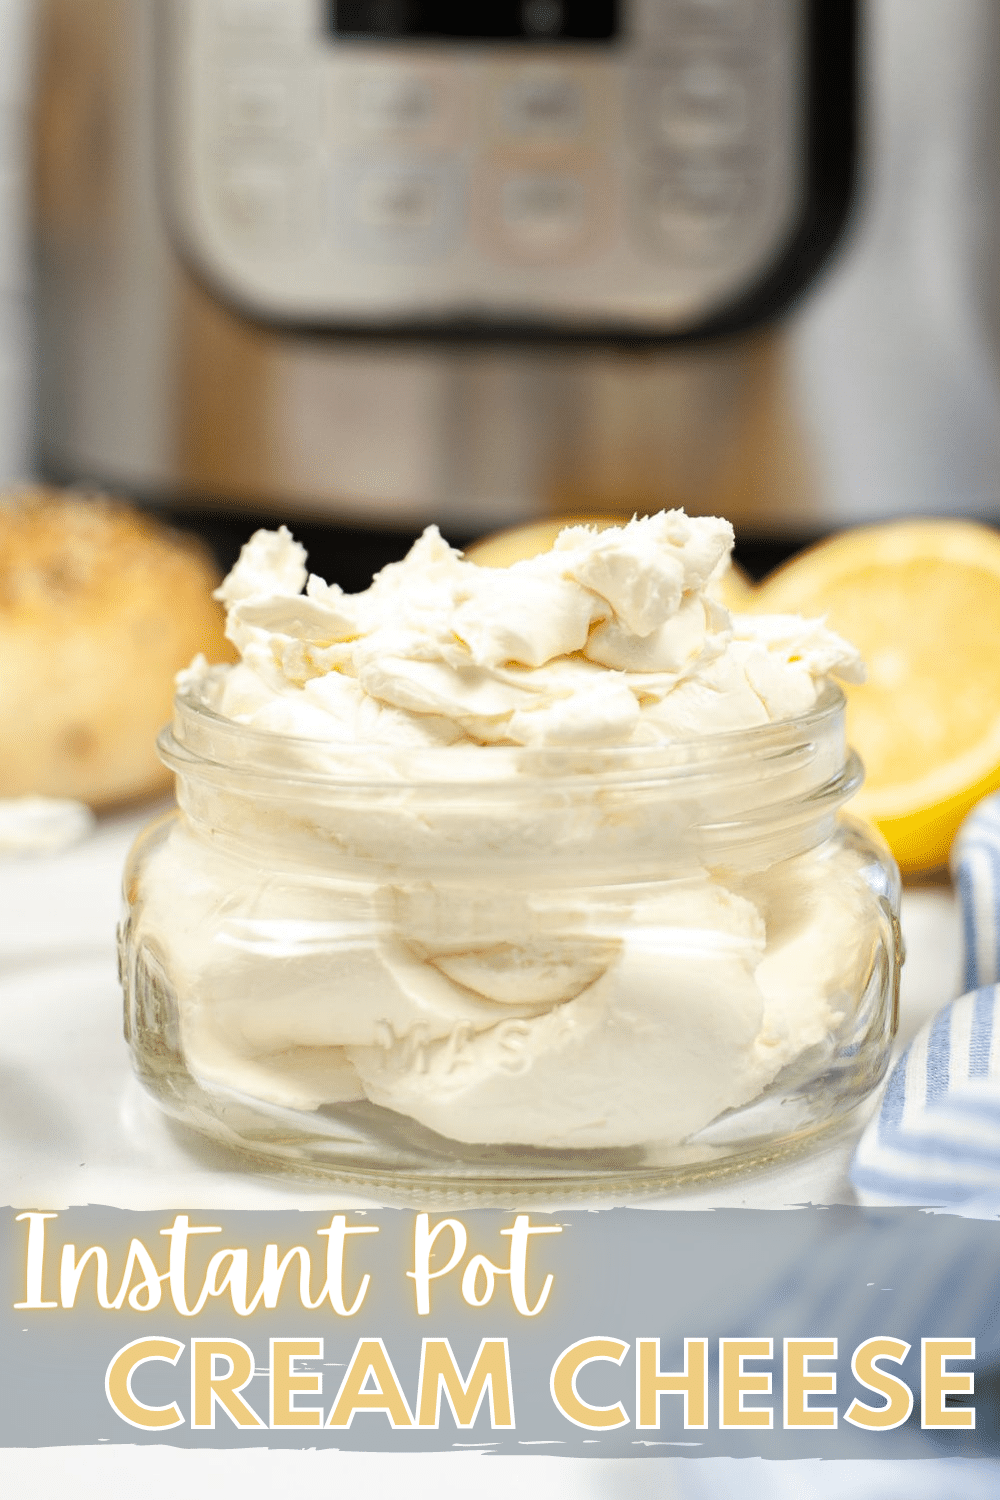 If you’re looking for an easy way to make cream cheese, then this Instant Pot Cream Cheese is the recipe for you! #instantpot #pressurecooker #creamcheese #recipe via @wondermomwannab